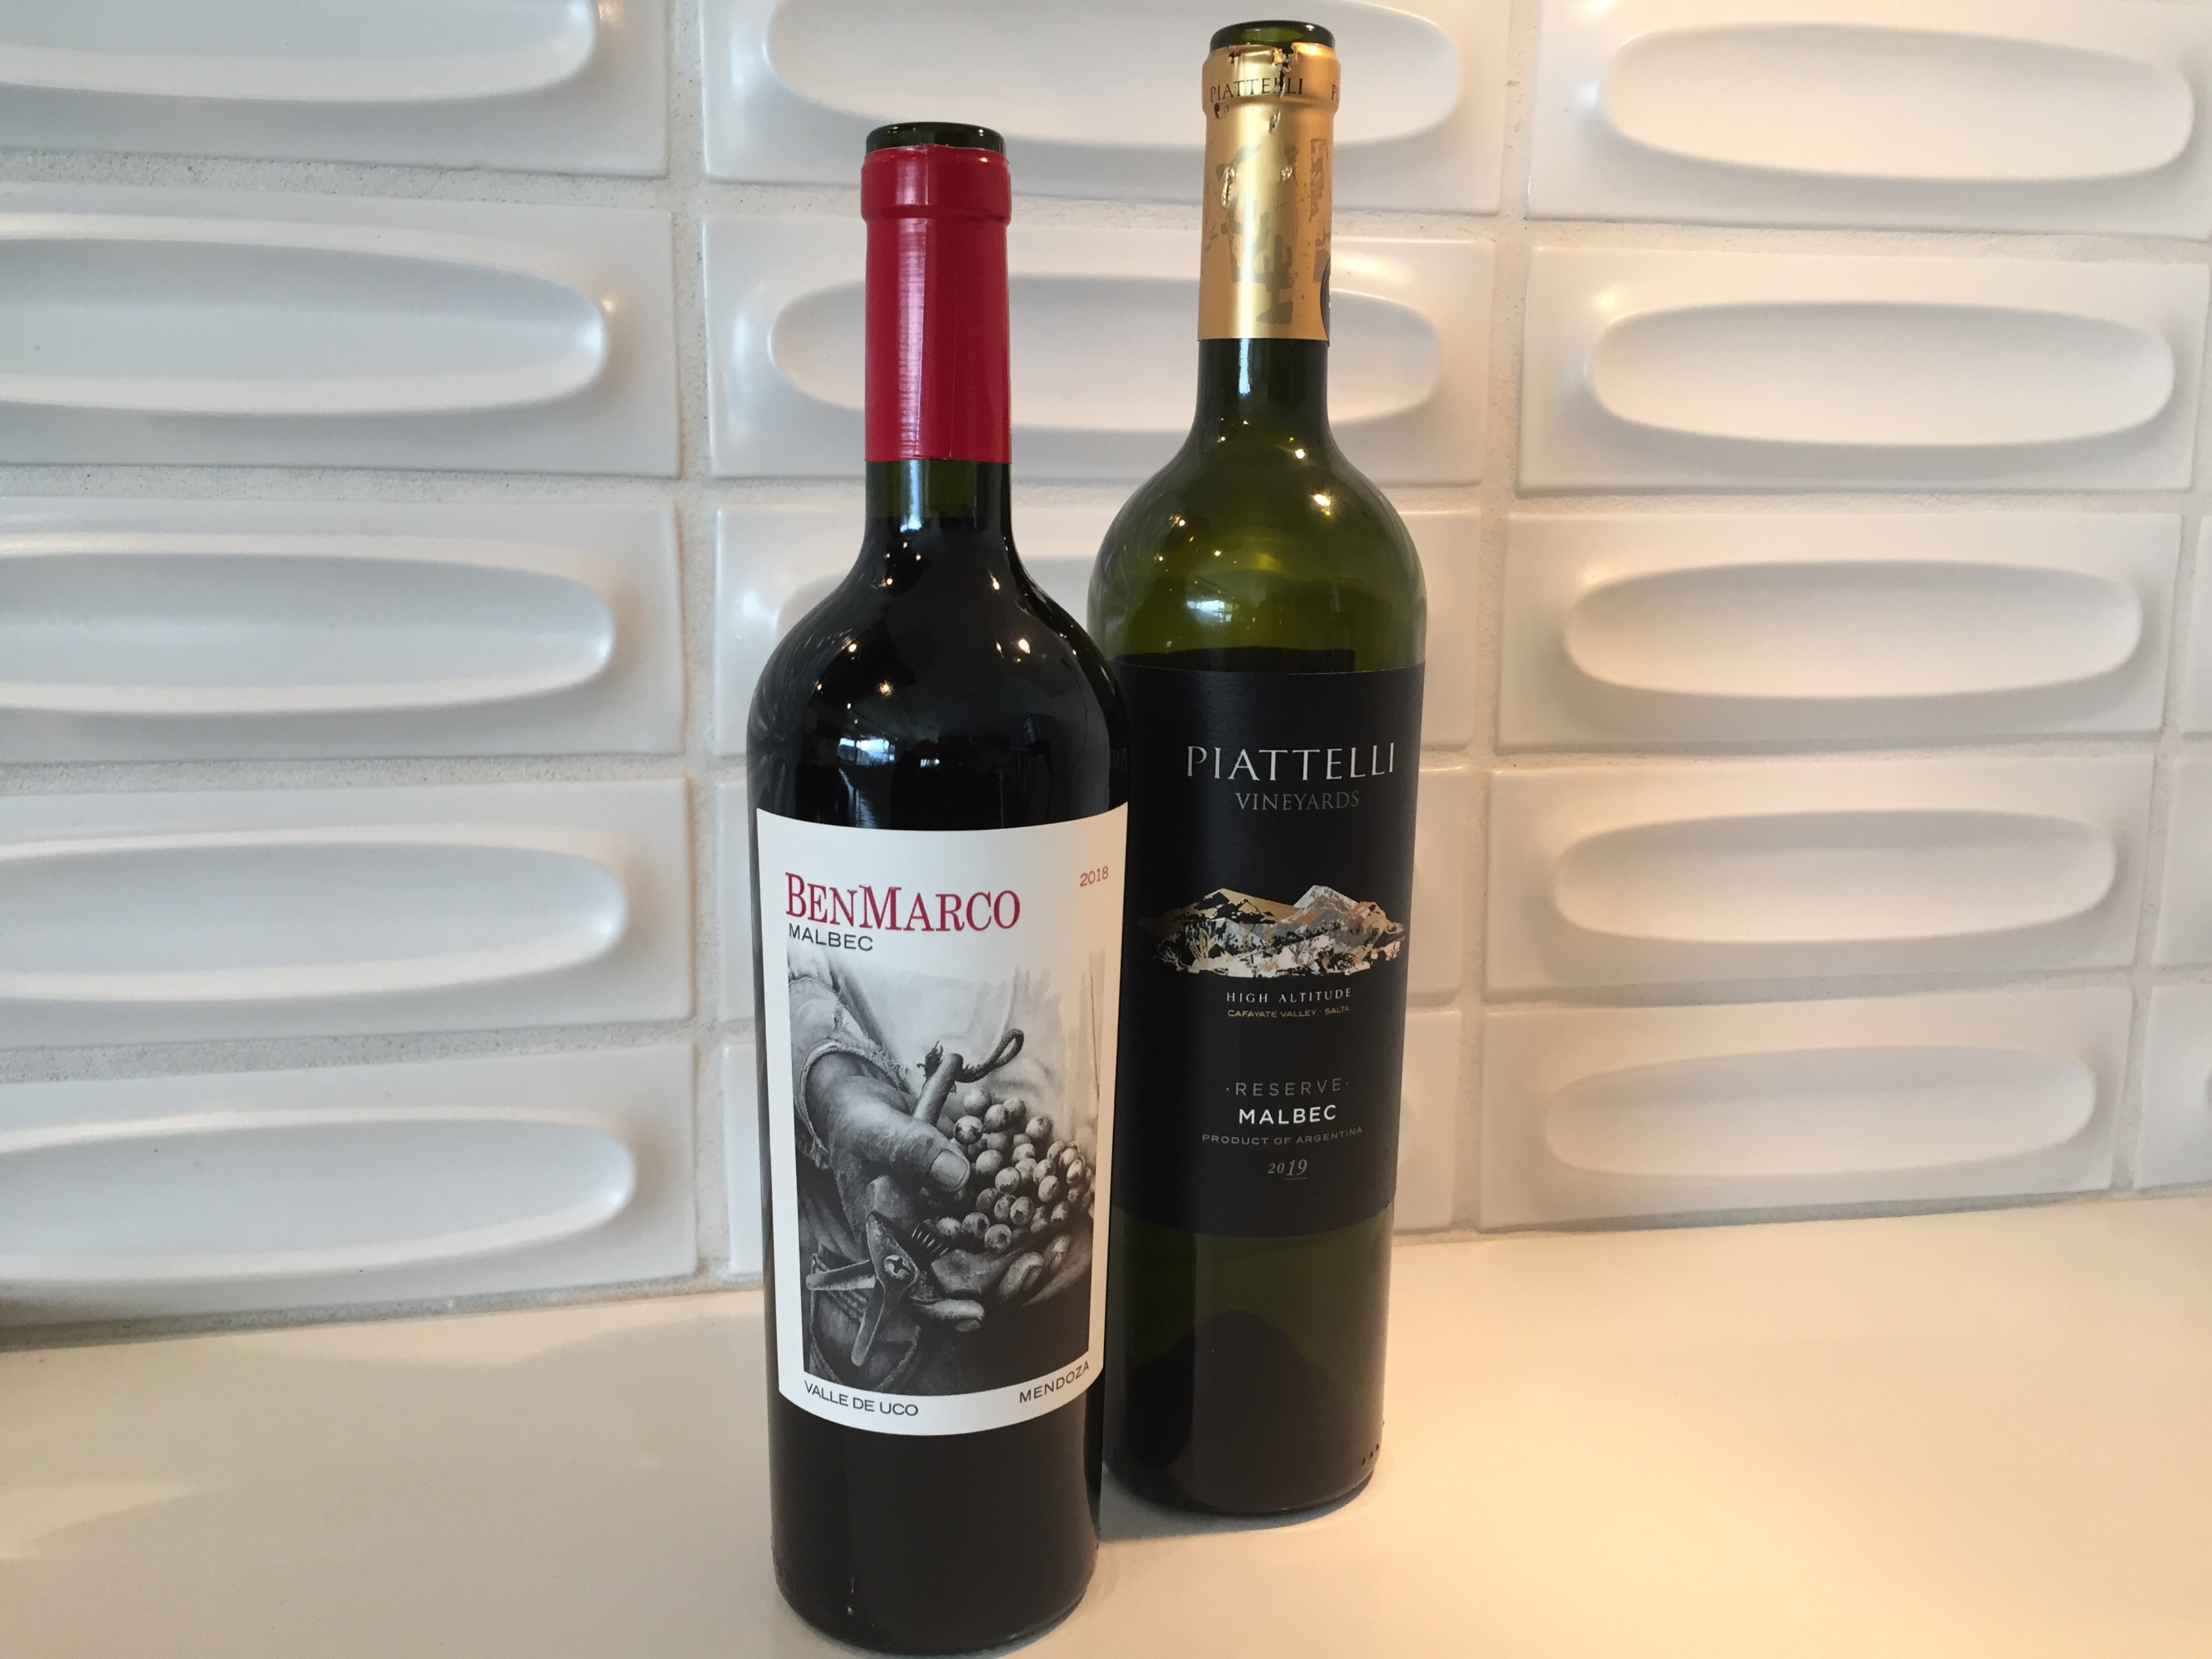 Bottle of Ben Marco 2018 Malbec (left)and Piatelli Vineyards 2019 Malbec. Both from Argentina and Costco.